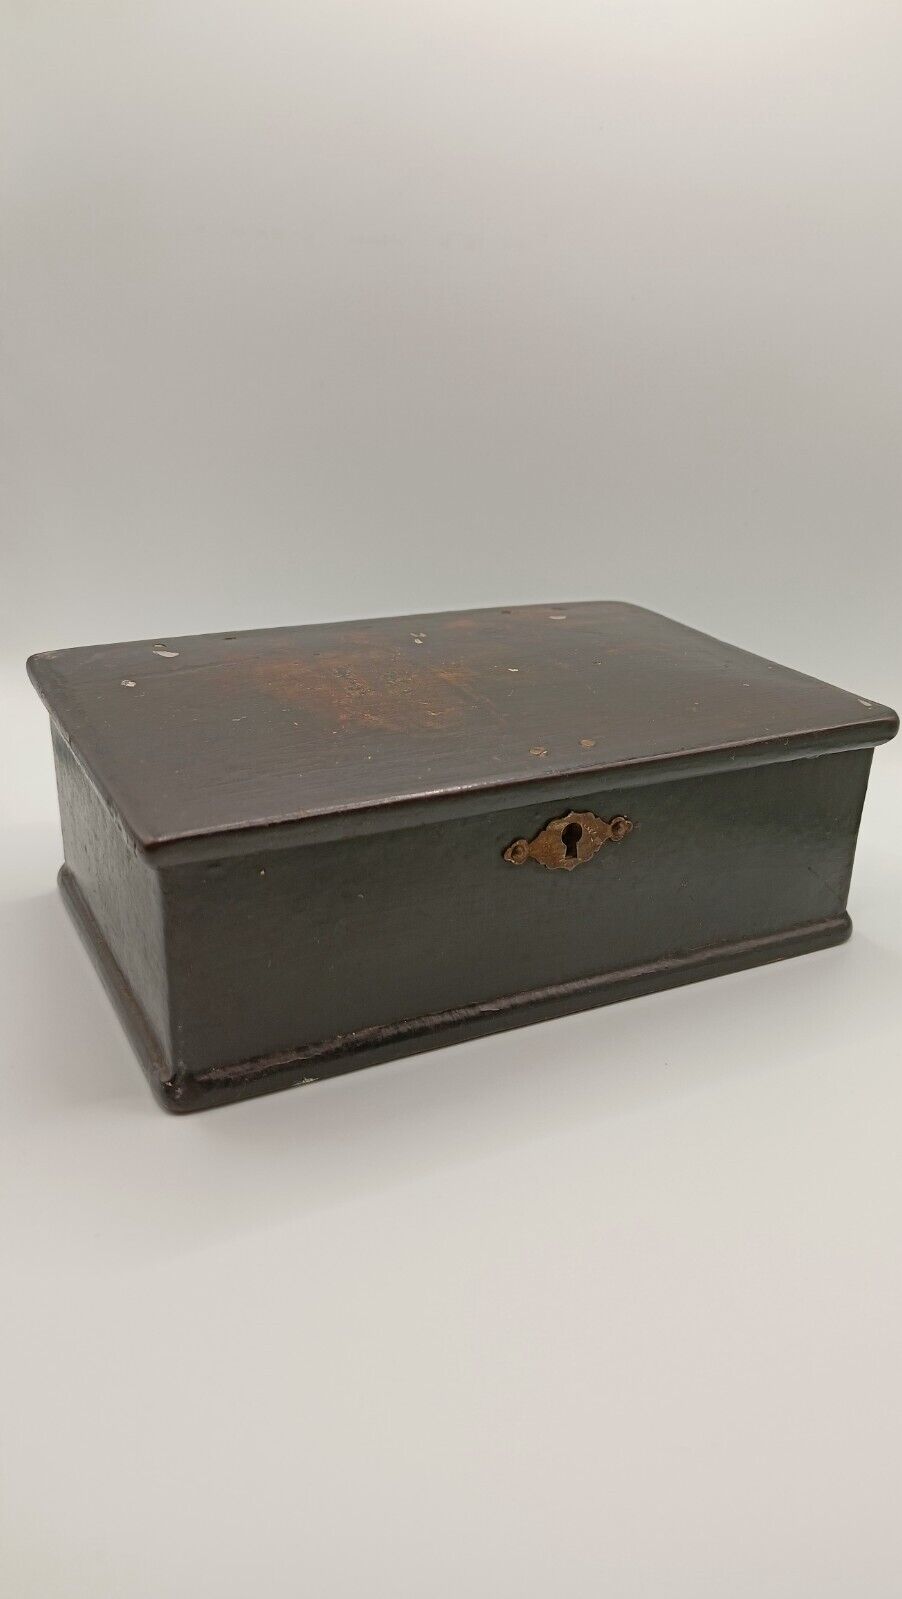 Vintage Antique Russian Box Casket Case of the 19th-20th century